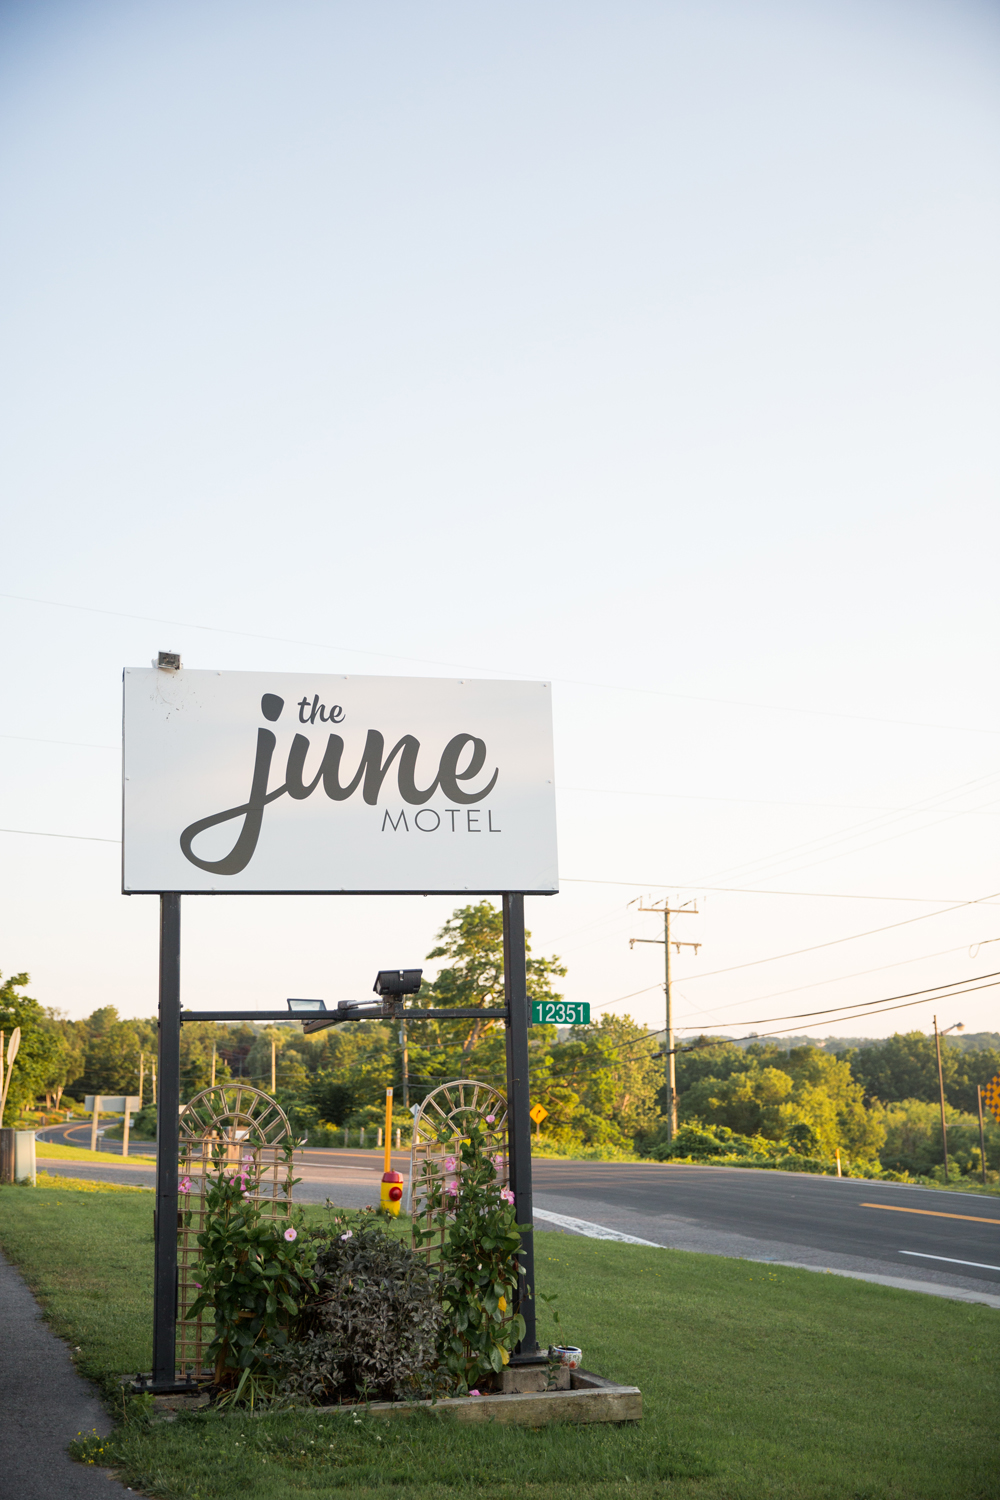 June Motel sign in Prince Edward County